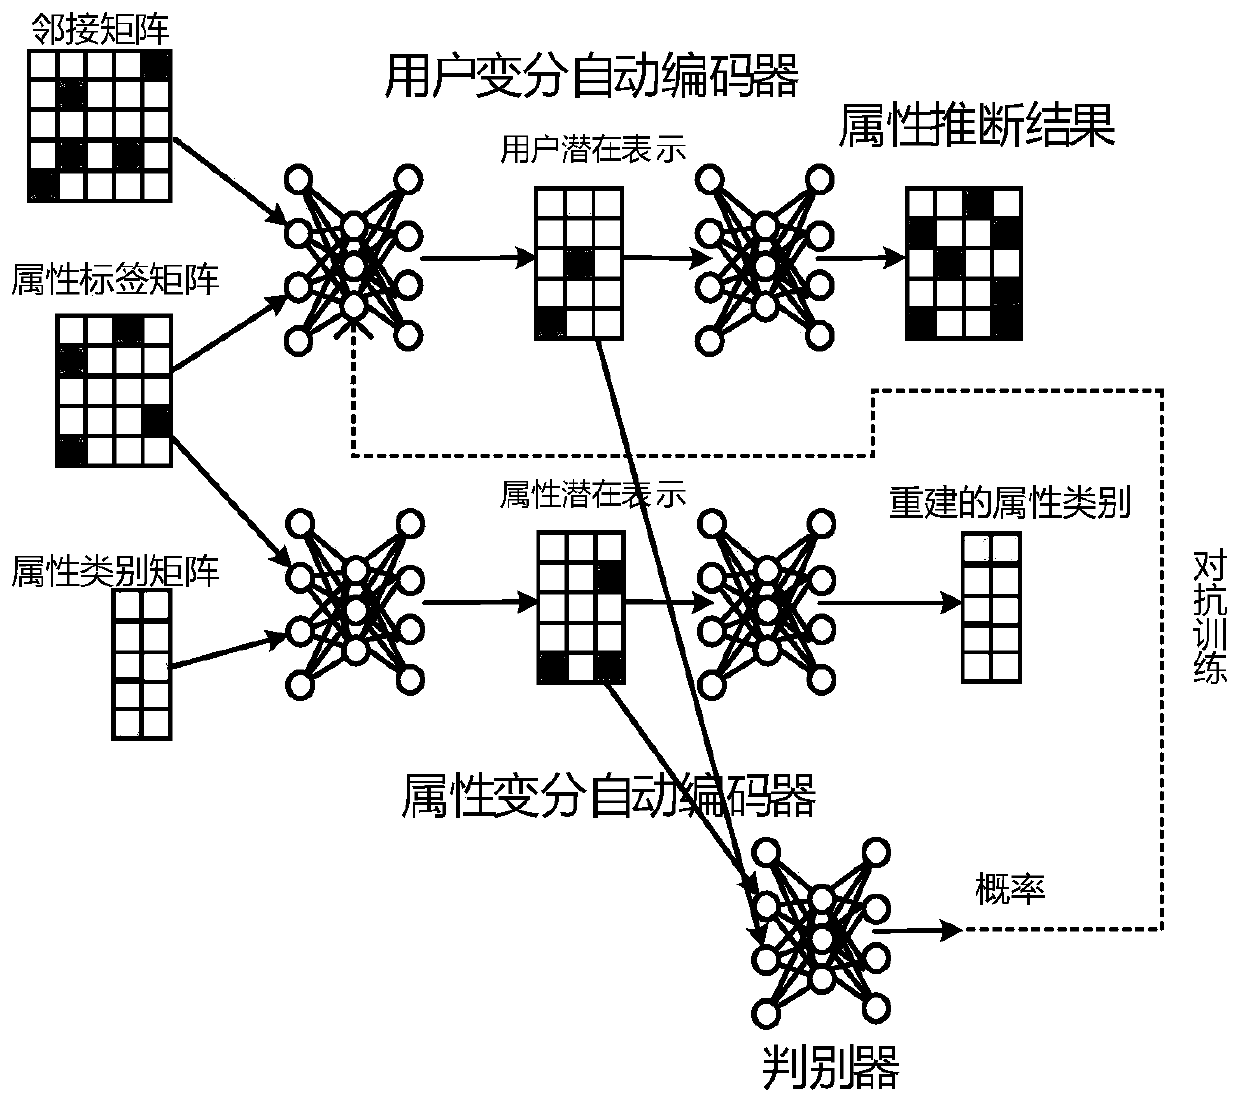 Multi-attribute inference method of social network users based on variational automatic encoder